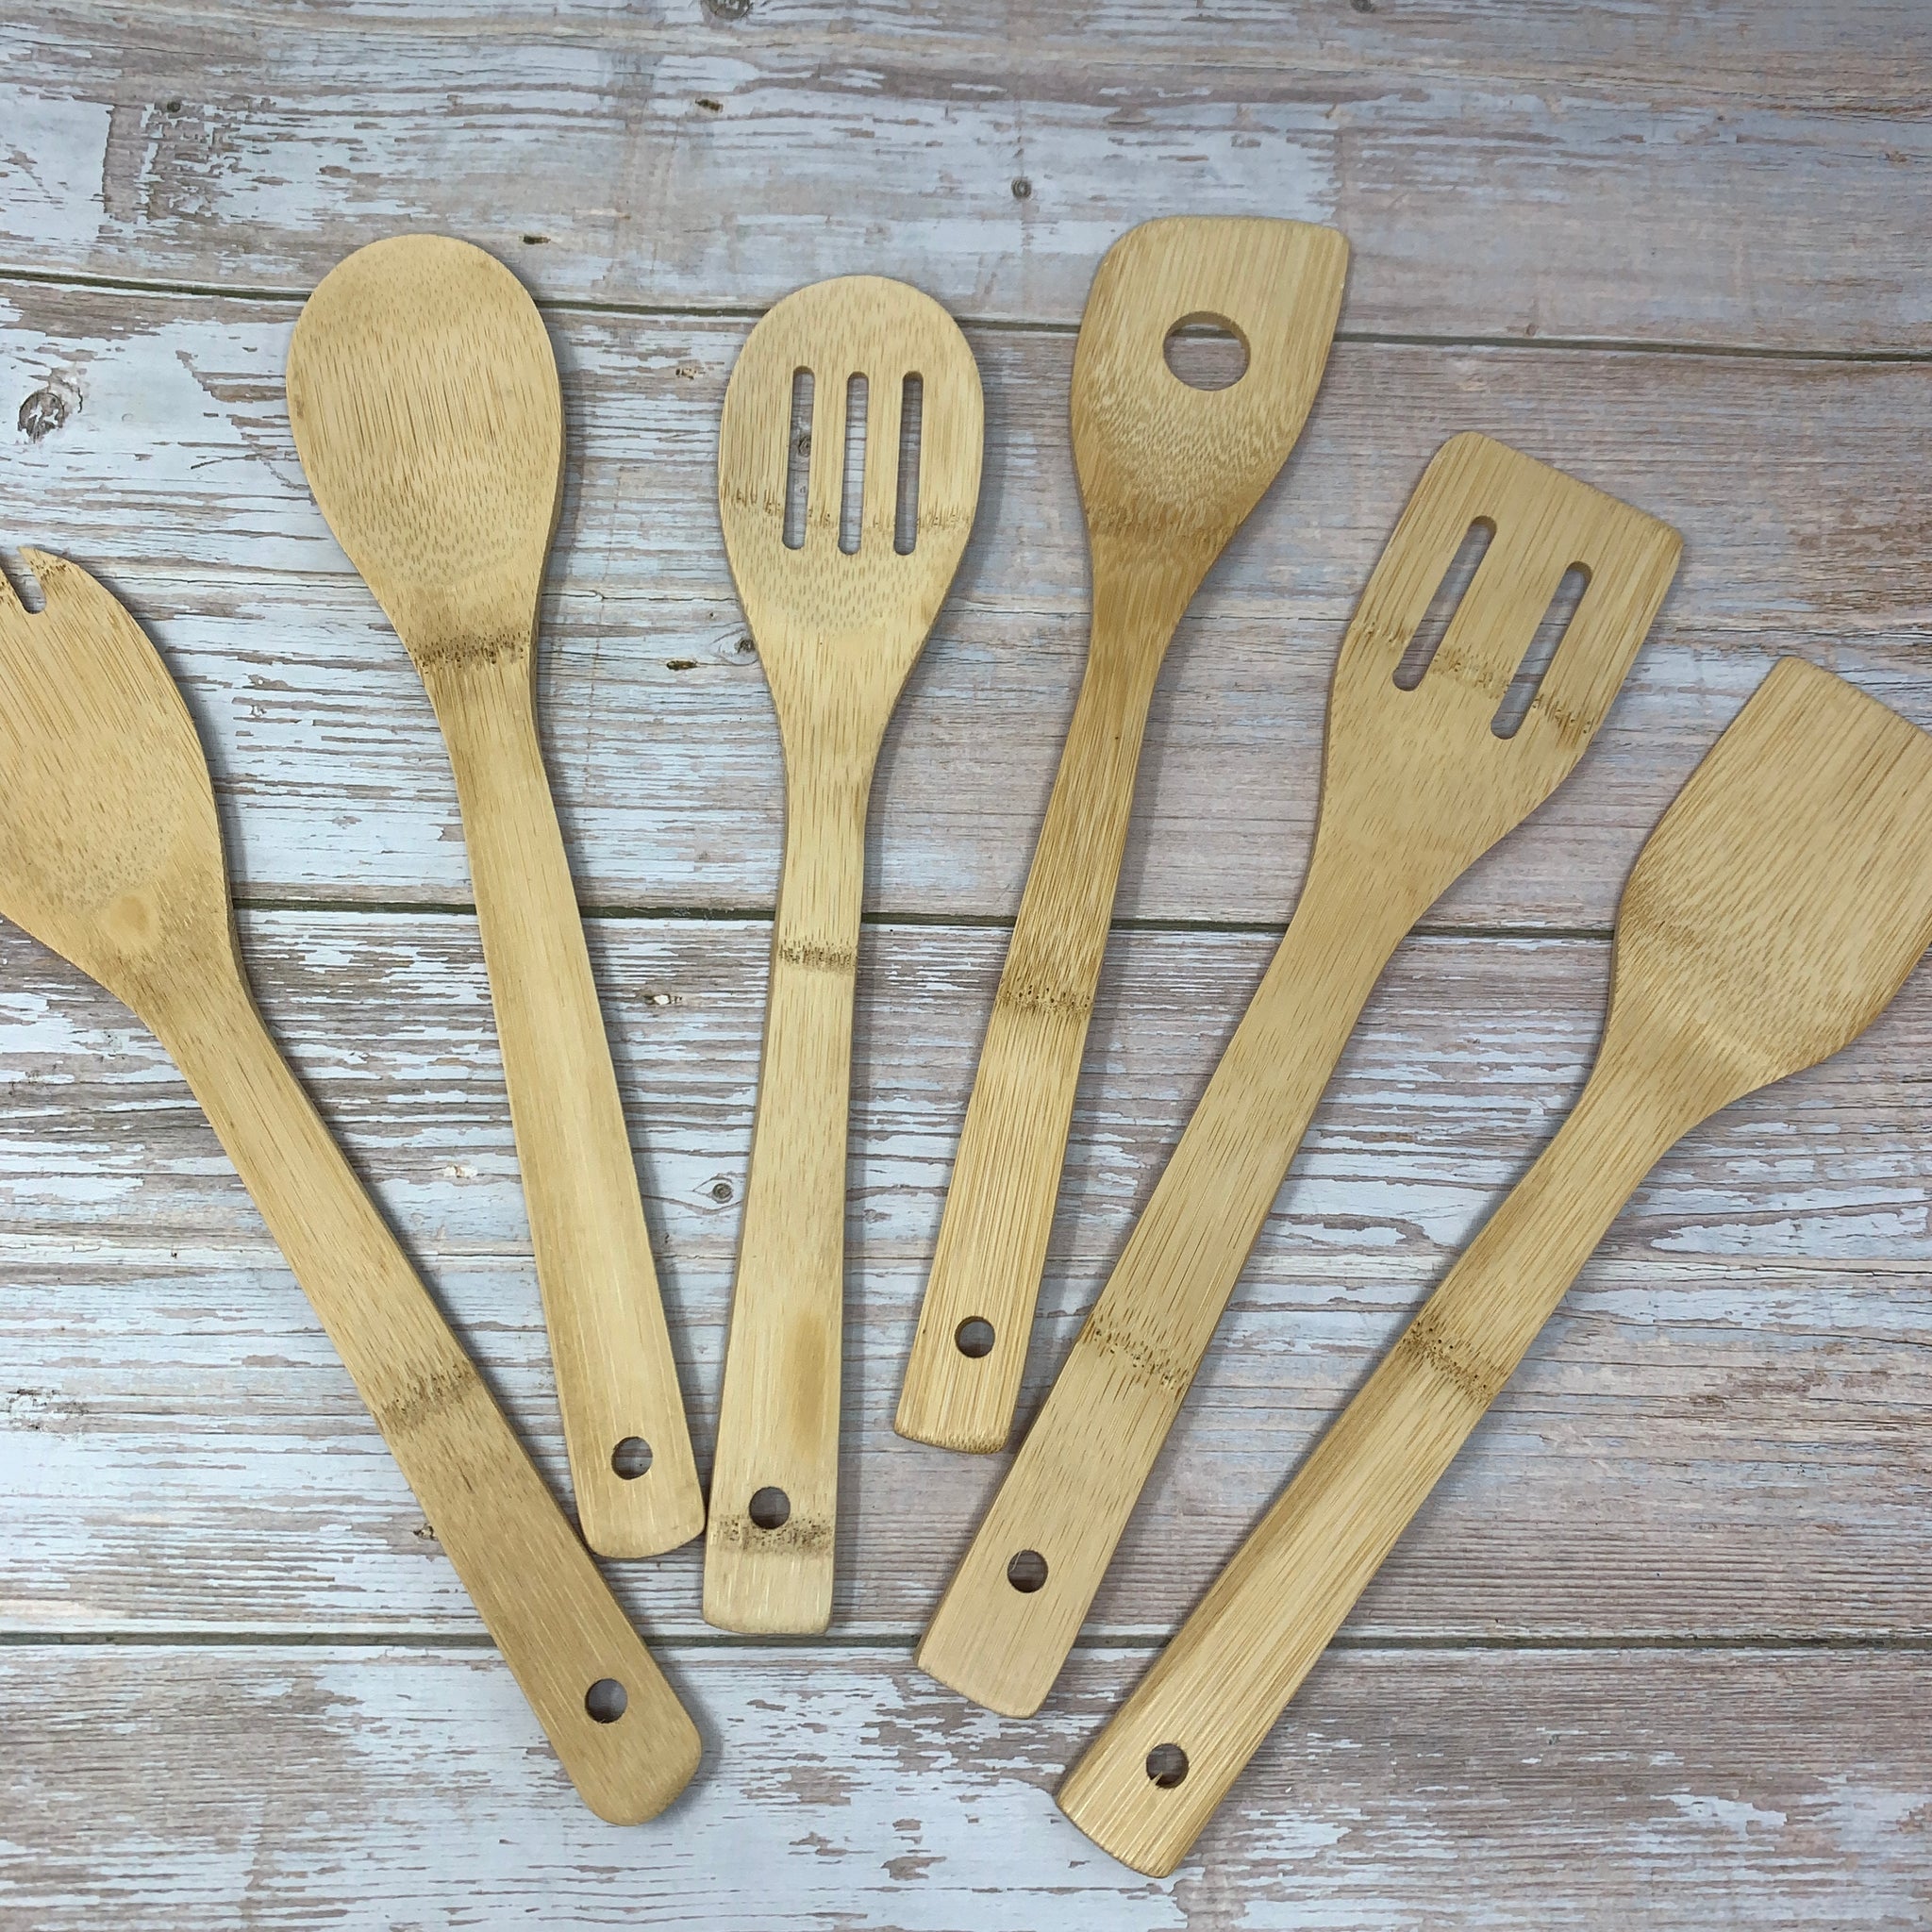 Set of Bamboo Kitchen Utensils, Bamboo Cooking Tools, Set of 6